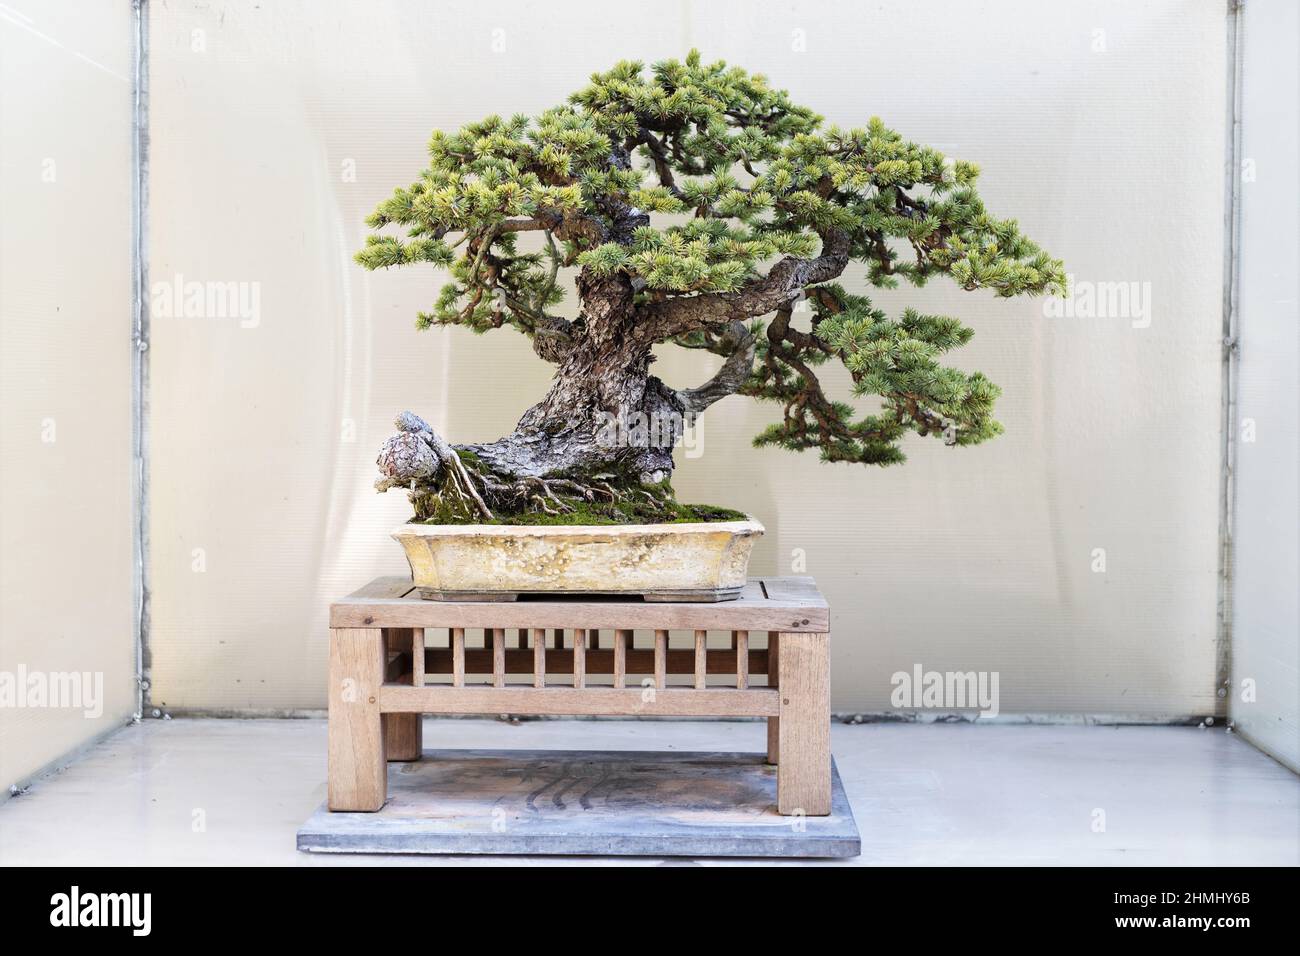 Colorado Blue Spruce bonsai tree on display at the Pacific Bonsai Museum in Federal Way, Washington. Stock Photo